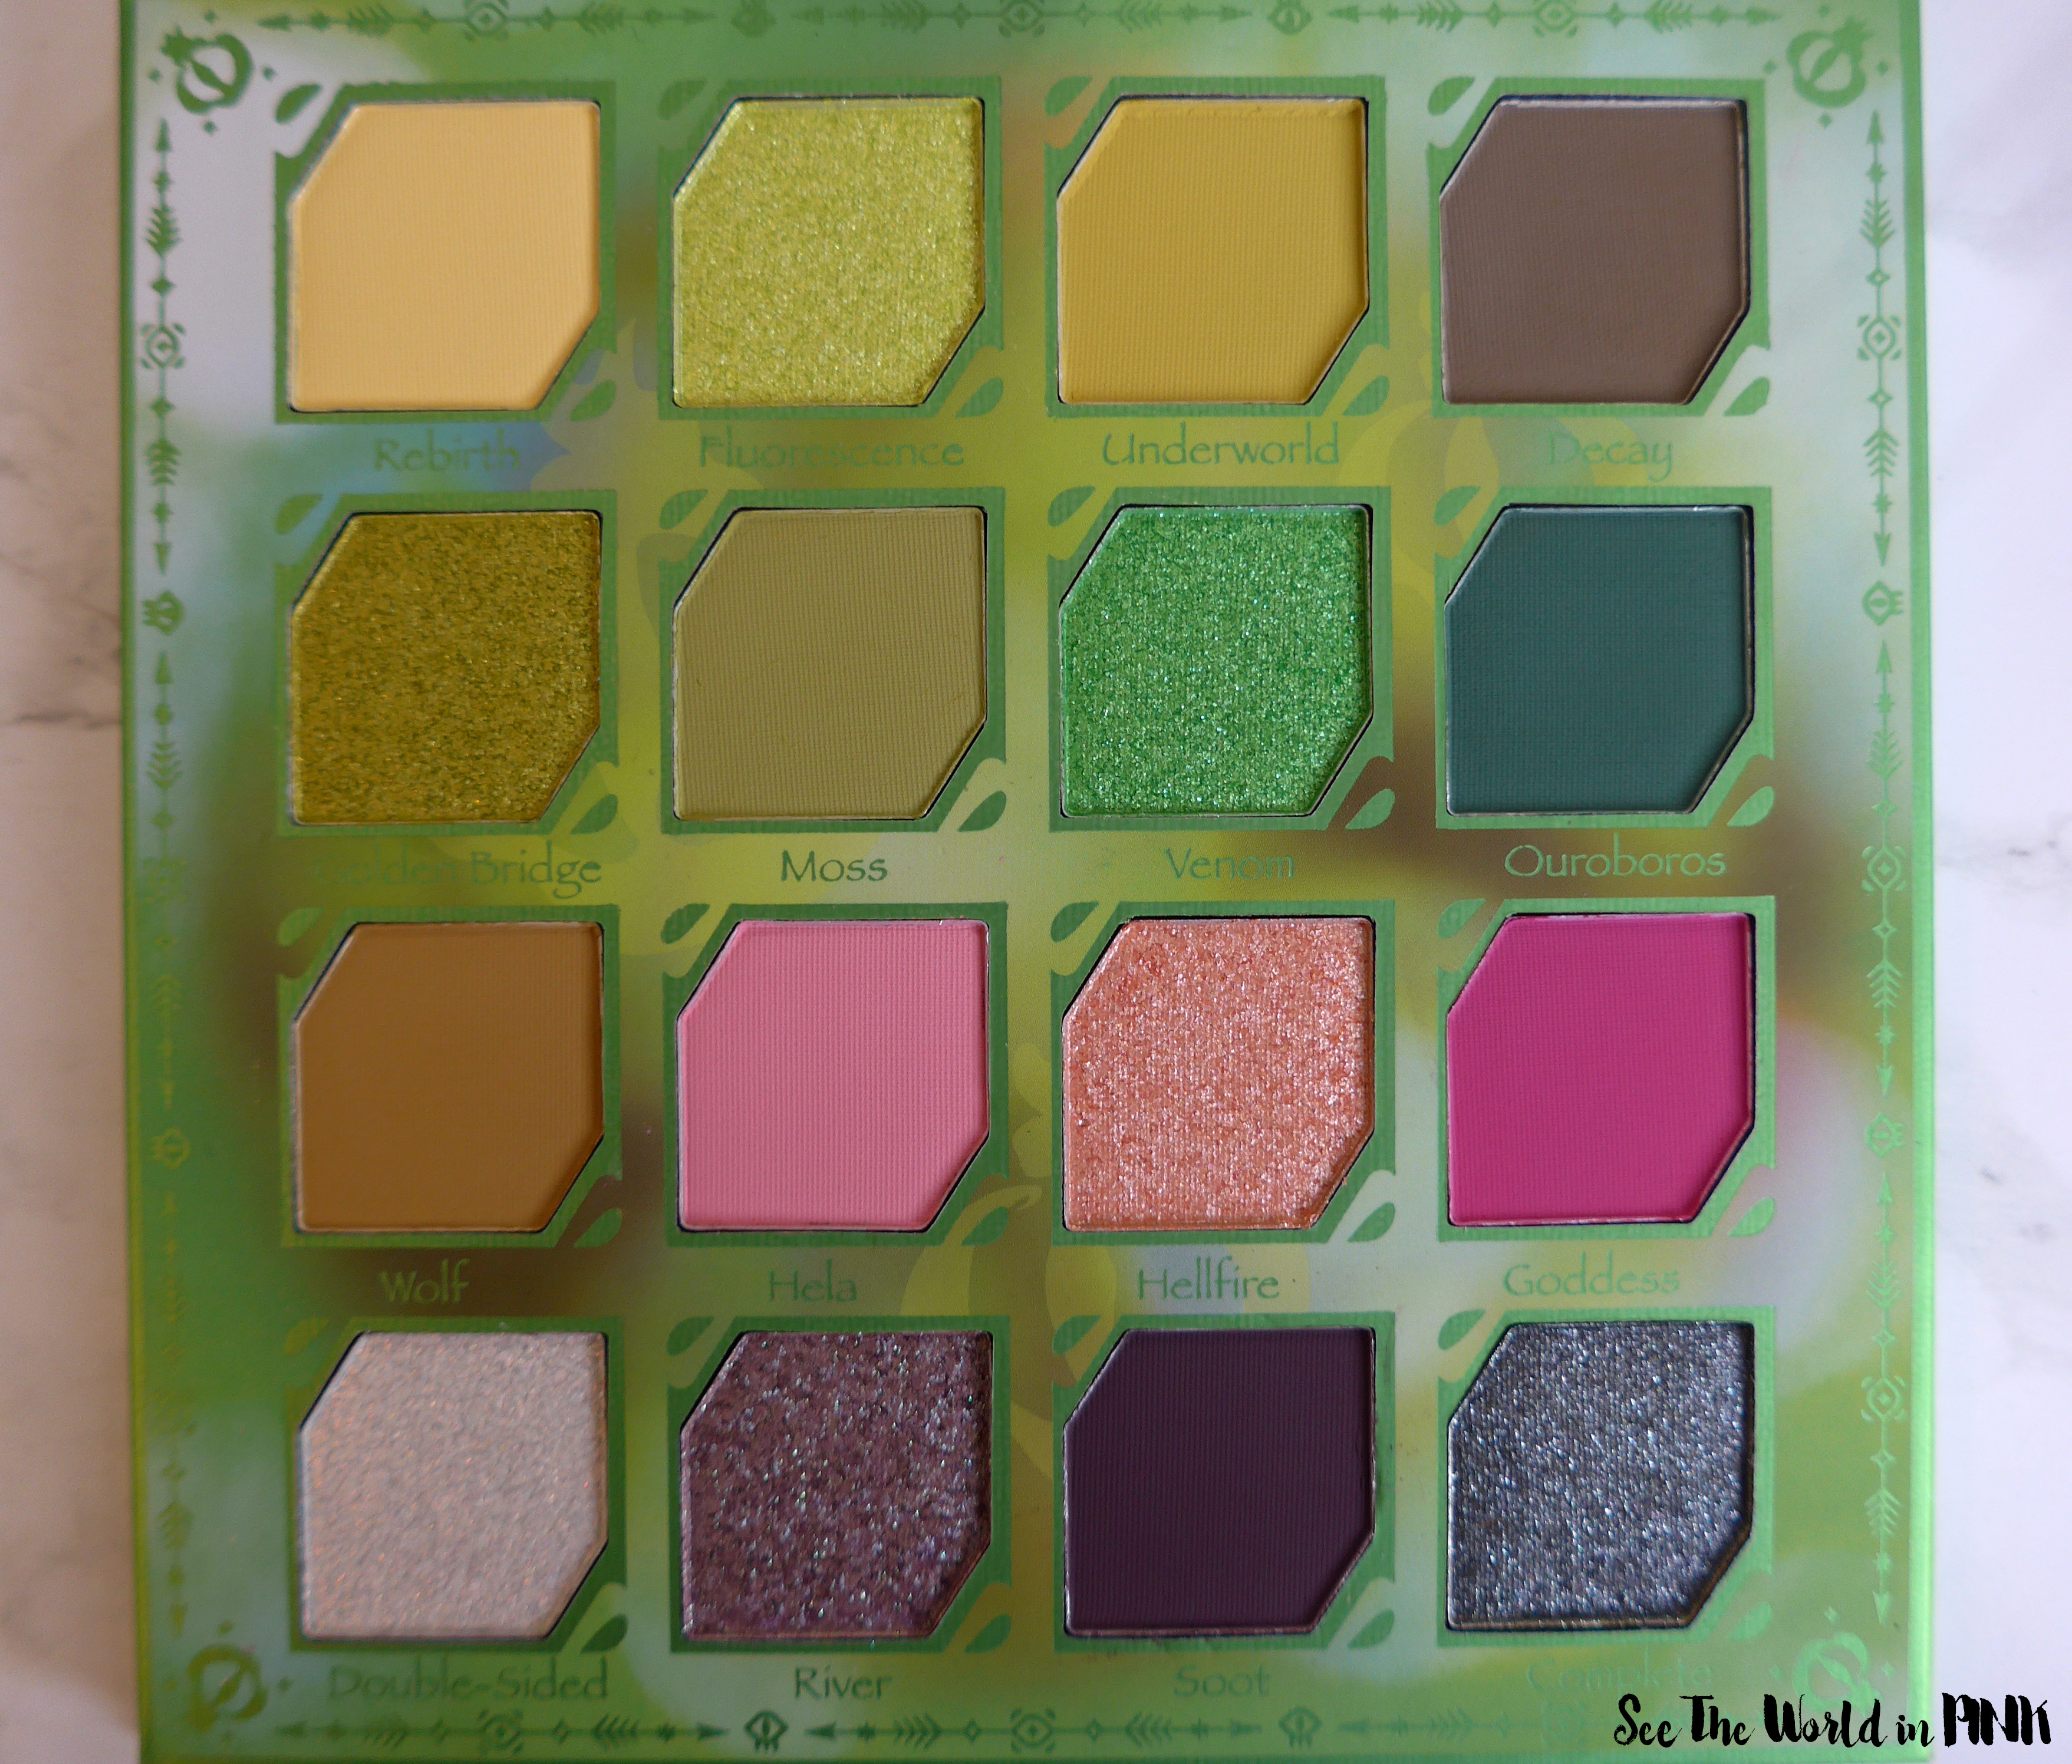 Oden's Eye x Angelica Nyqvist Hela Eye Shadow Palette - Swatches, Thoughts, and 3 Looks